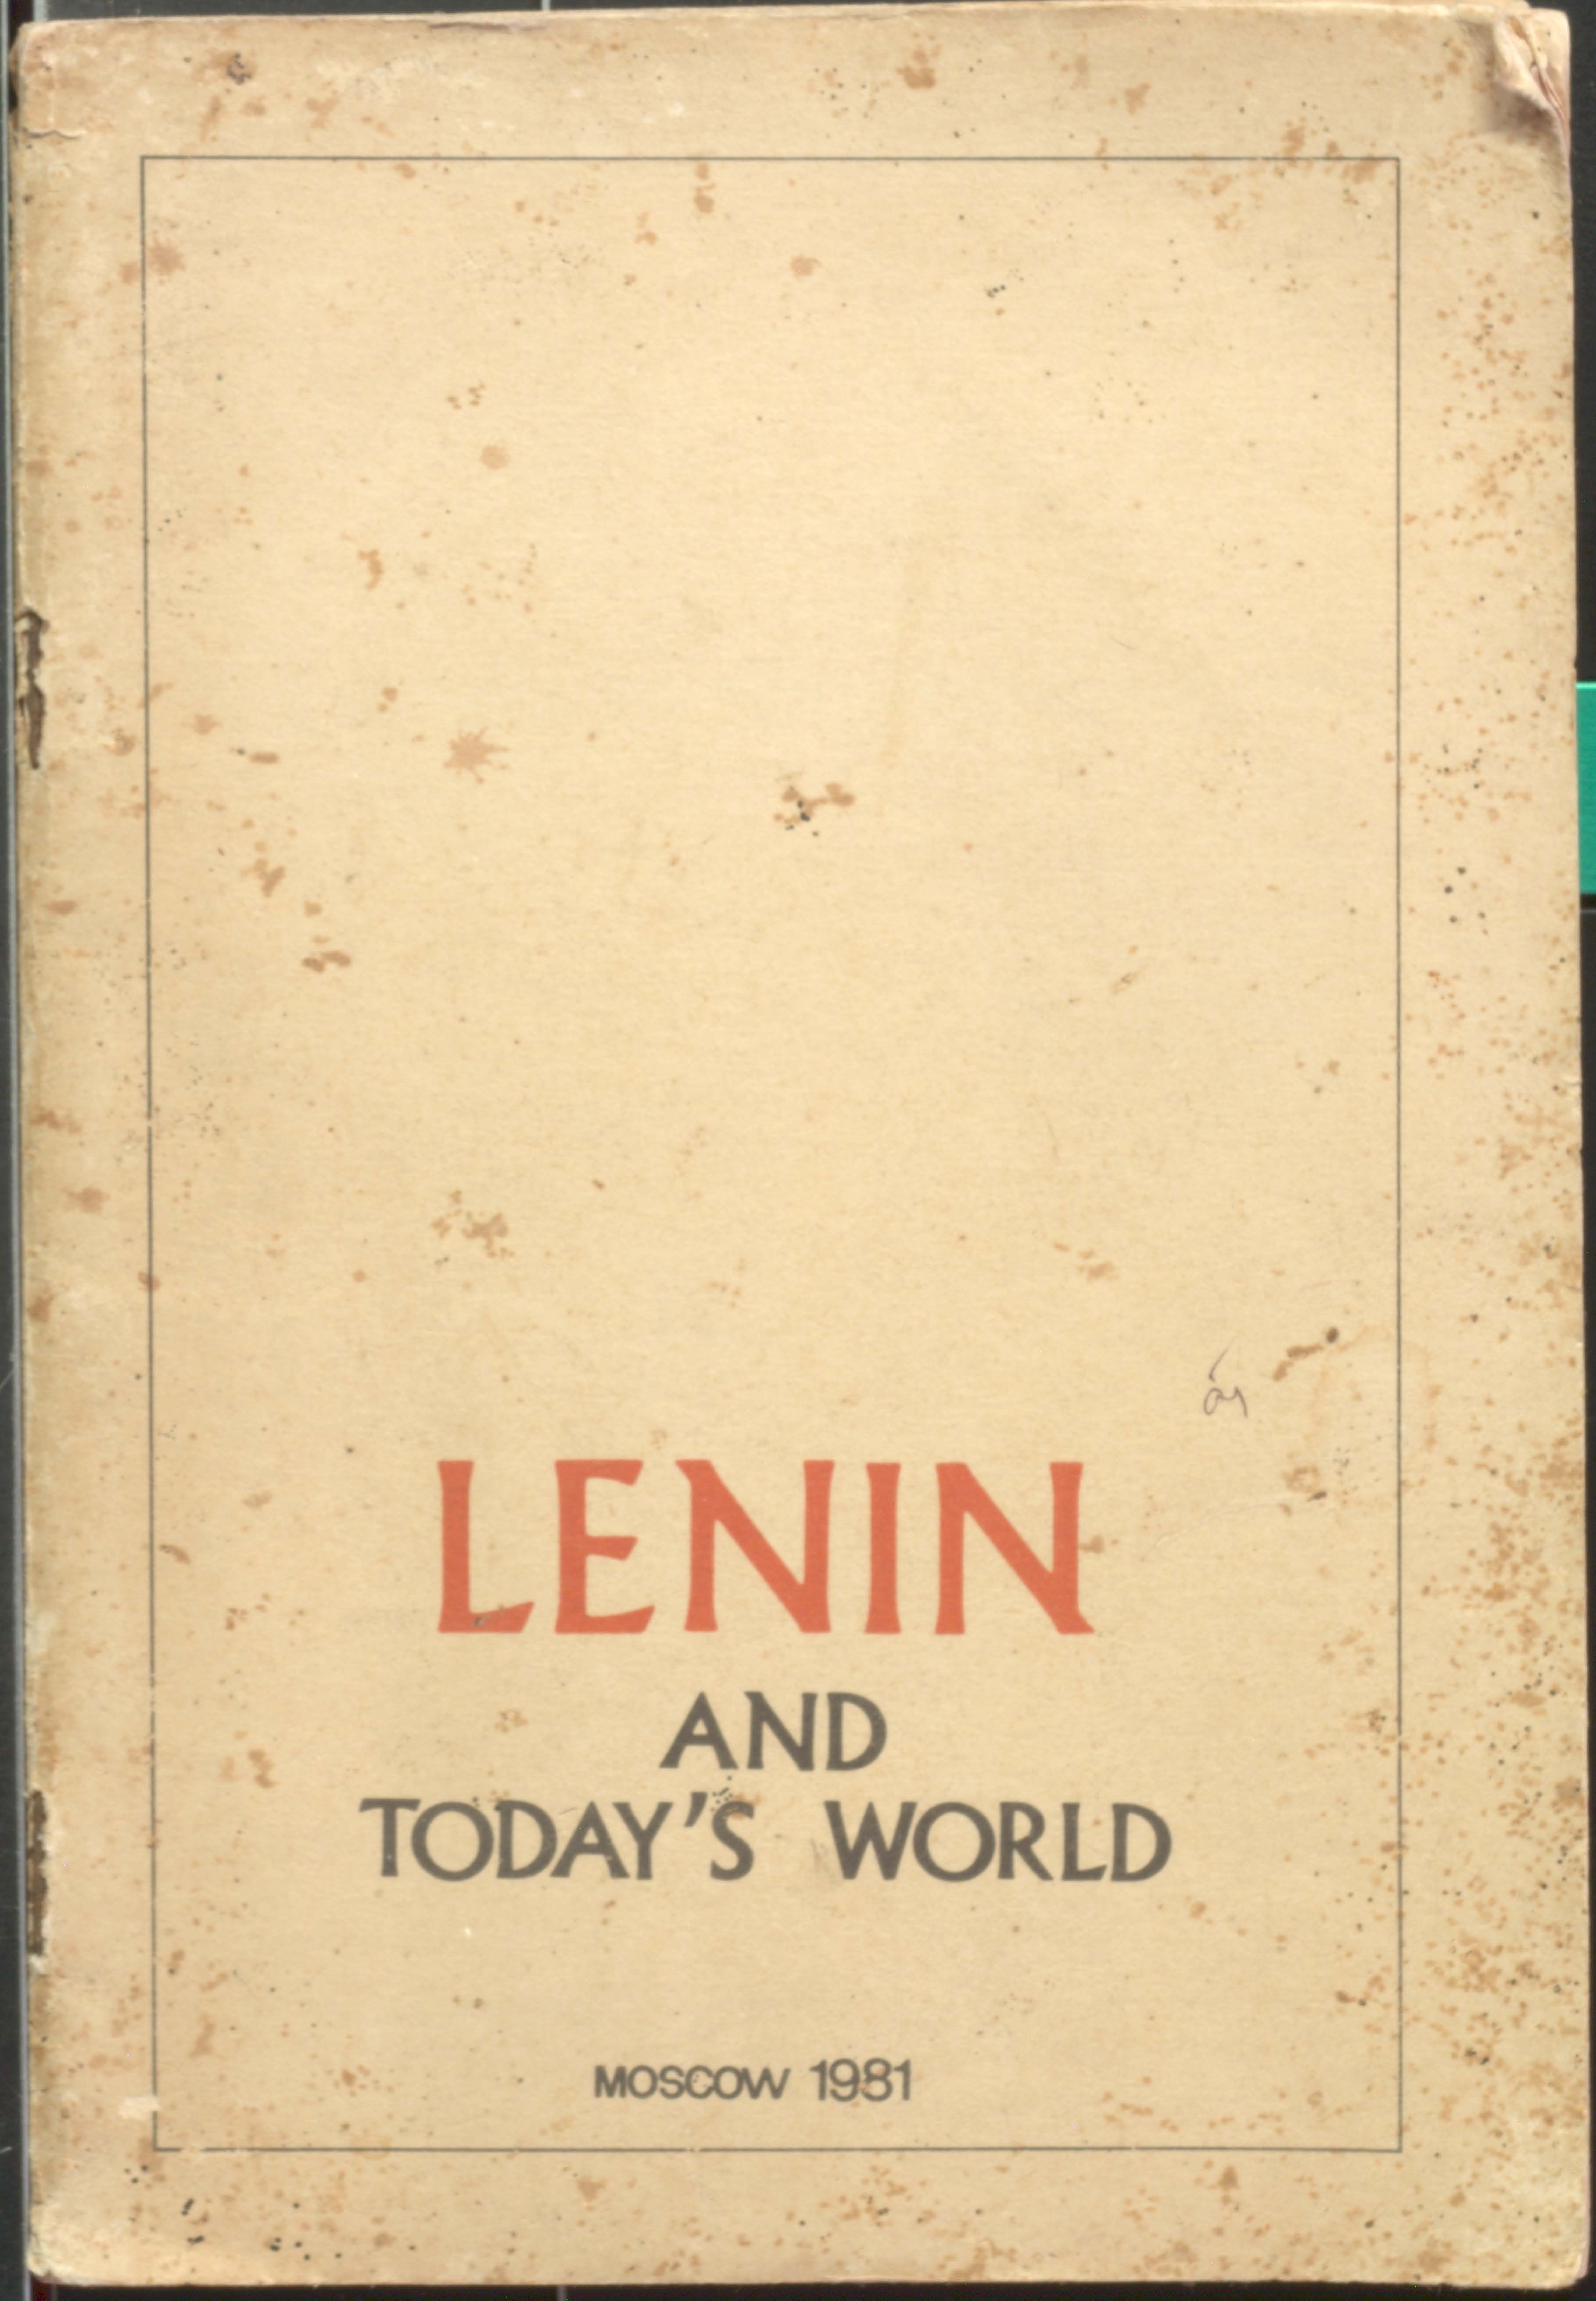 Lenin and today's world (moscow 1981)